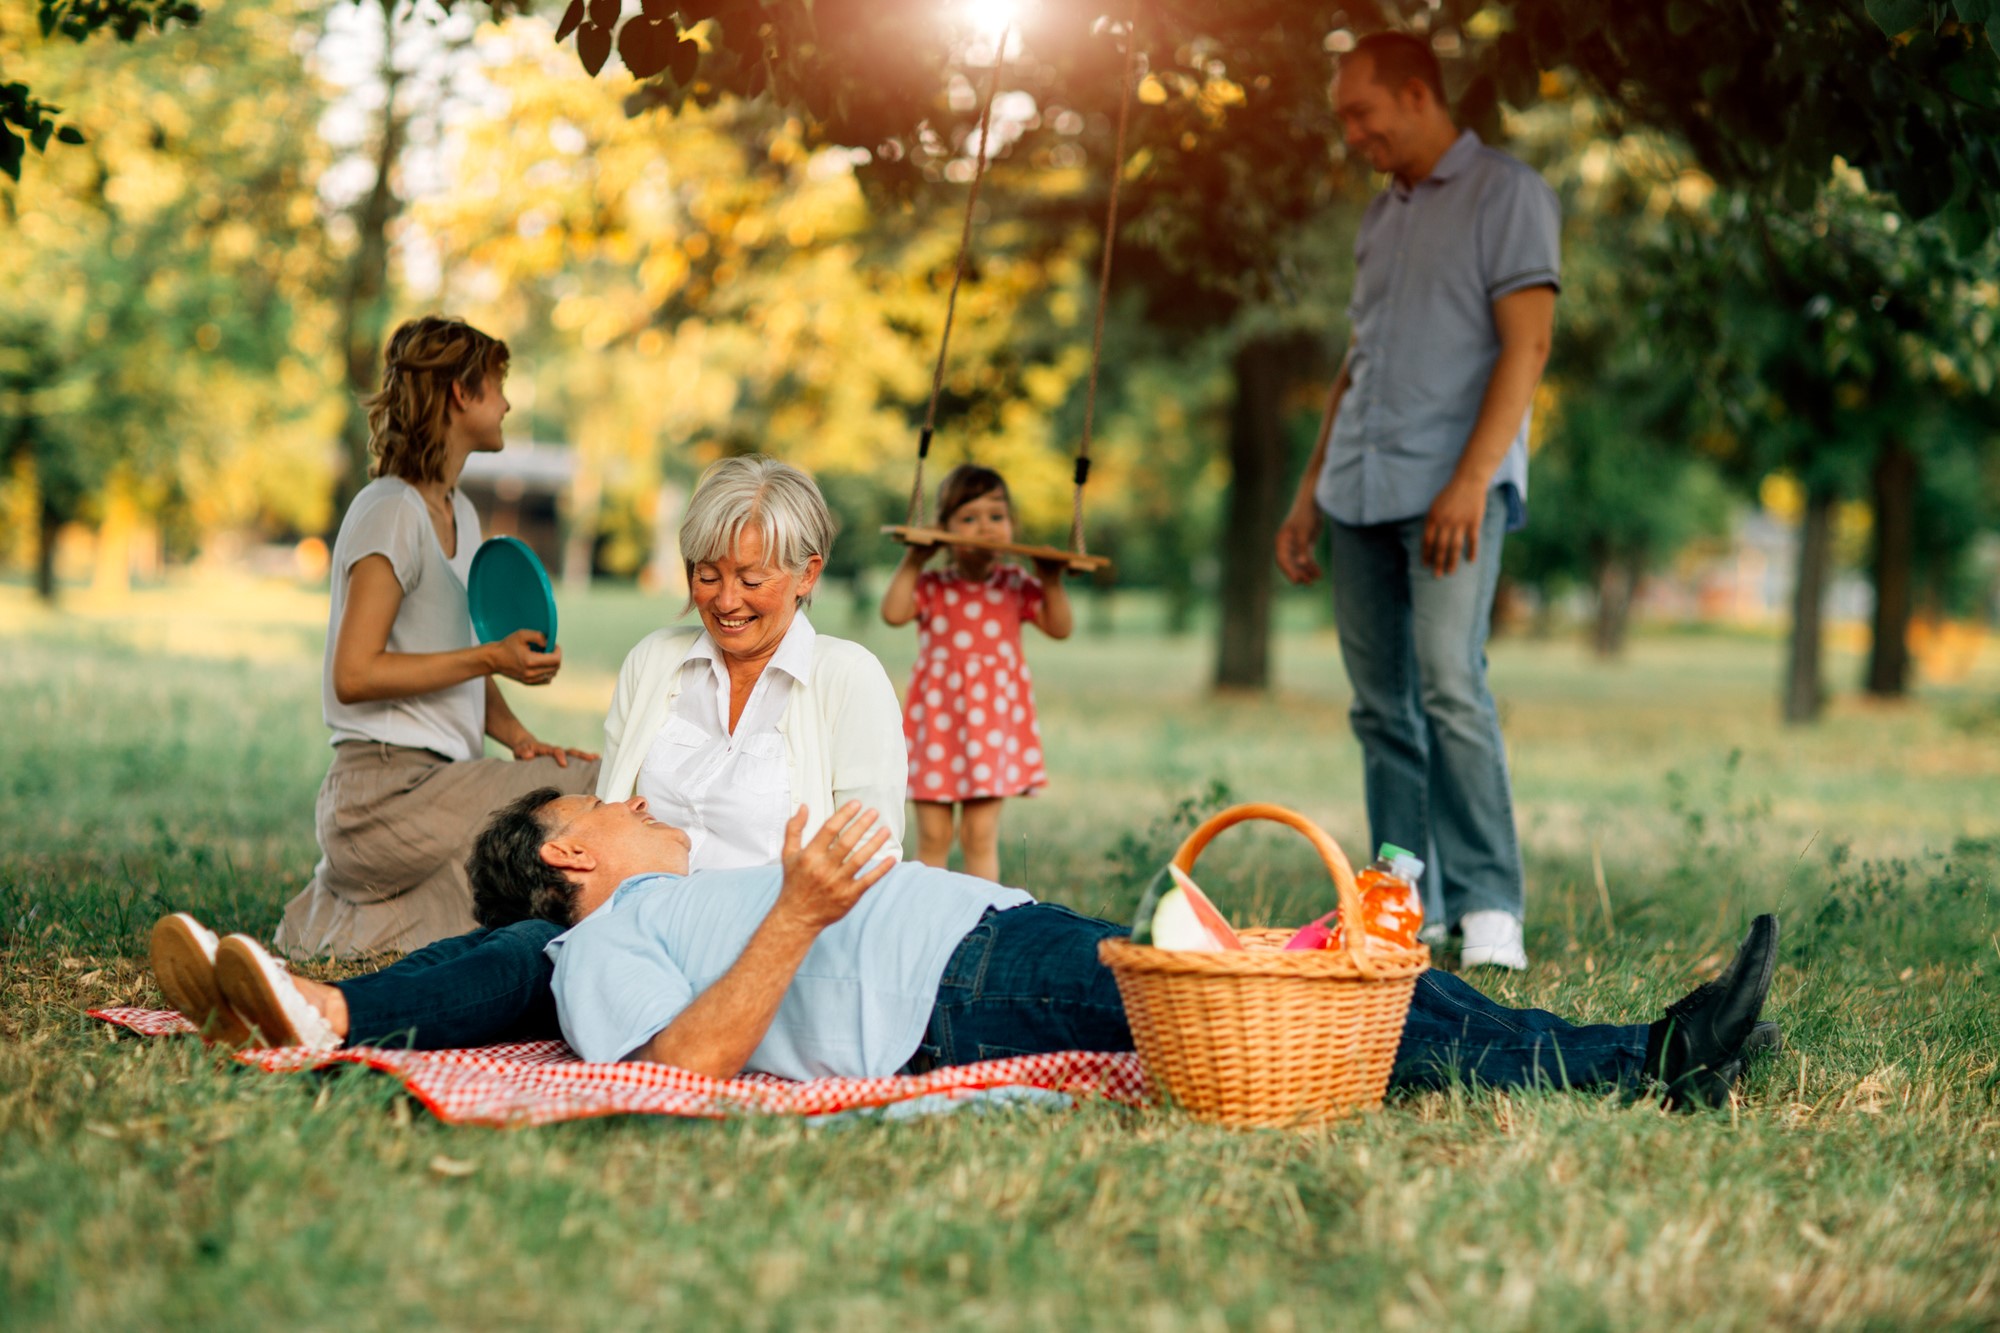 Family of three generations having picnic in a park